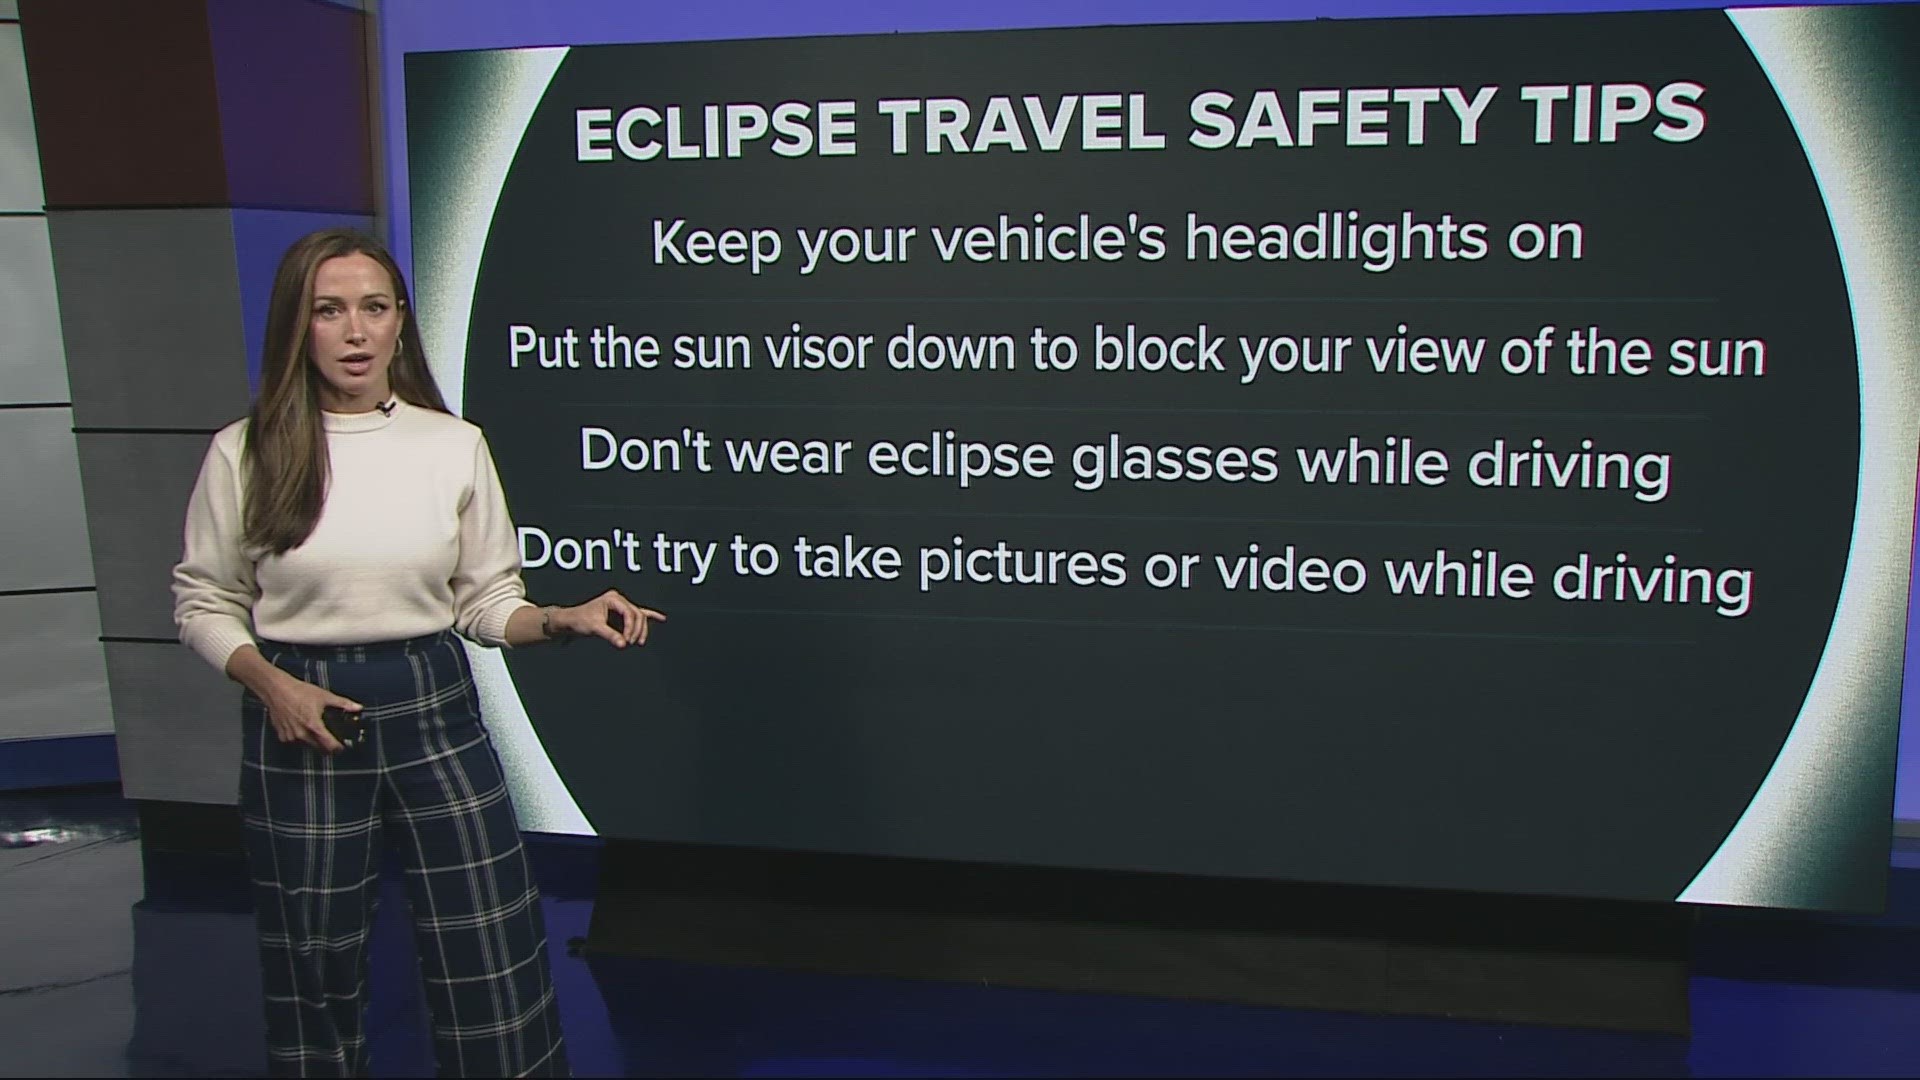 Many people will travel to the path of totality for a front-row seat of the total solar eclipse on April 8. Here's expert advice on how to make your trip go smoothly